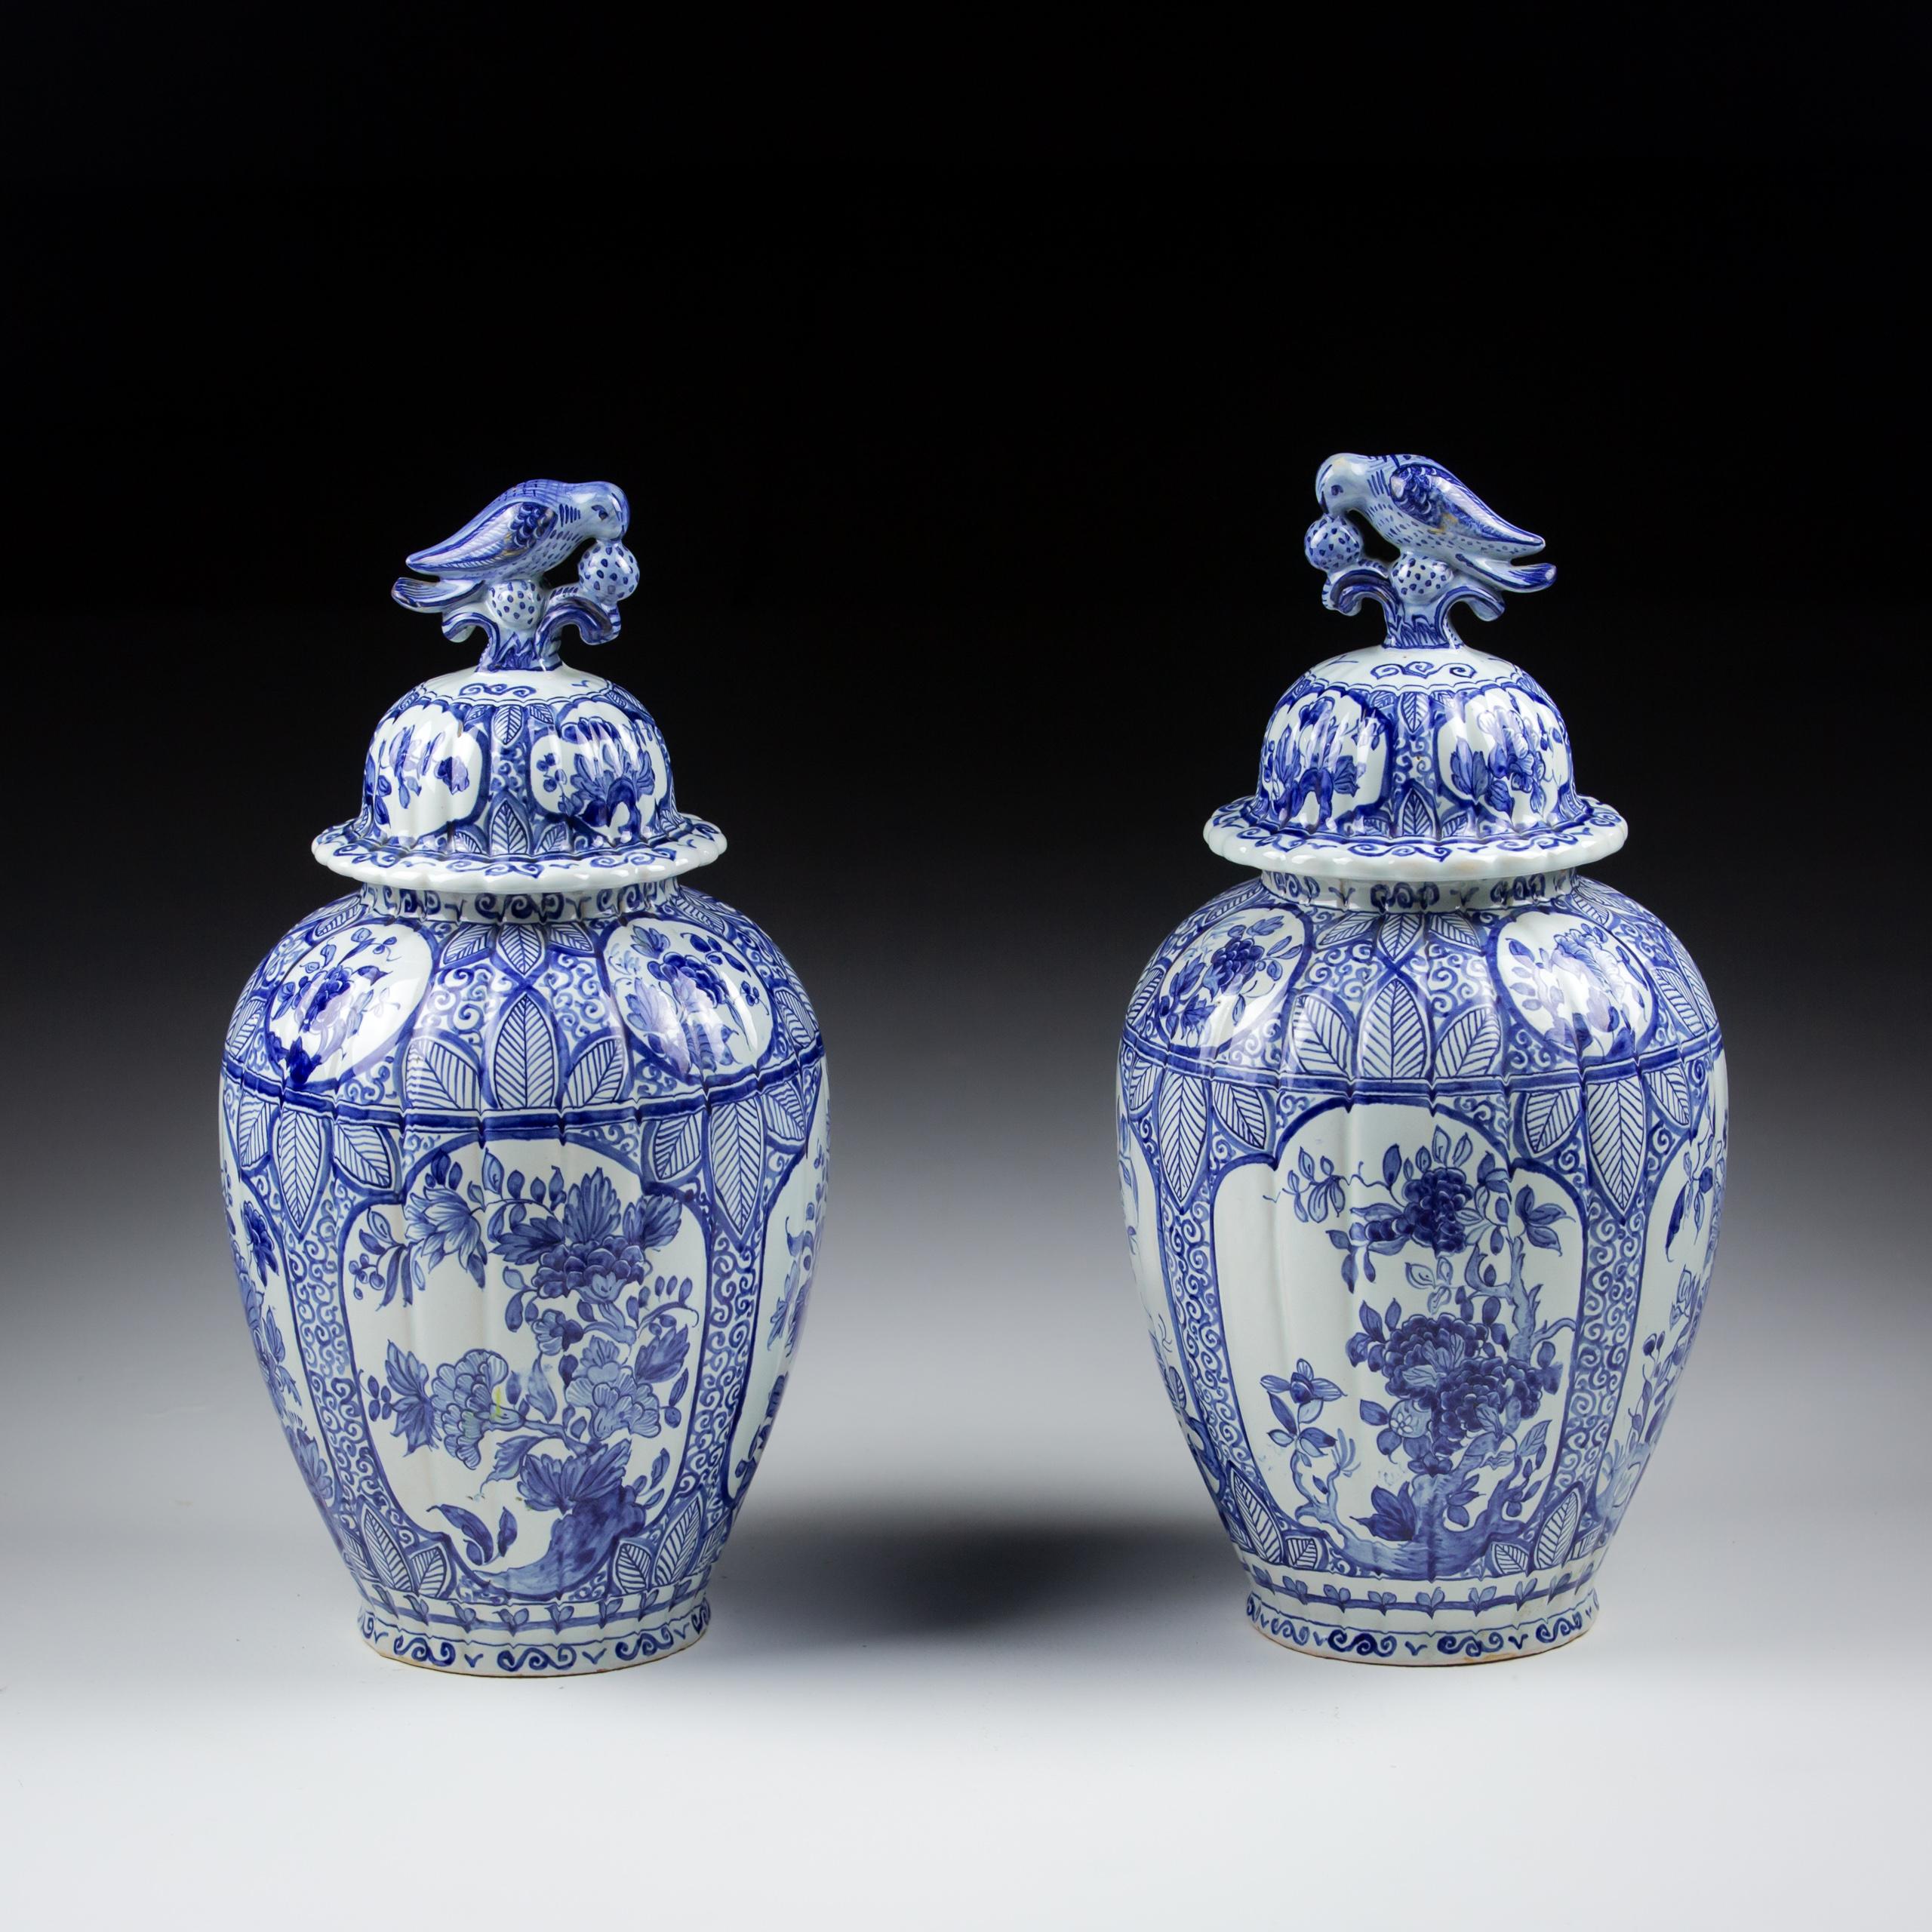 Pair of Early 20th Century Desvres Delft Covered Vase. Profusely decorated with bird finials to lids. One small Chip to rim of one vase France Circa 1920.